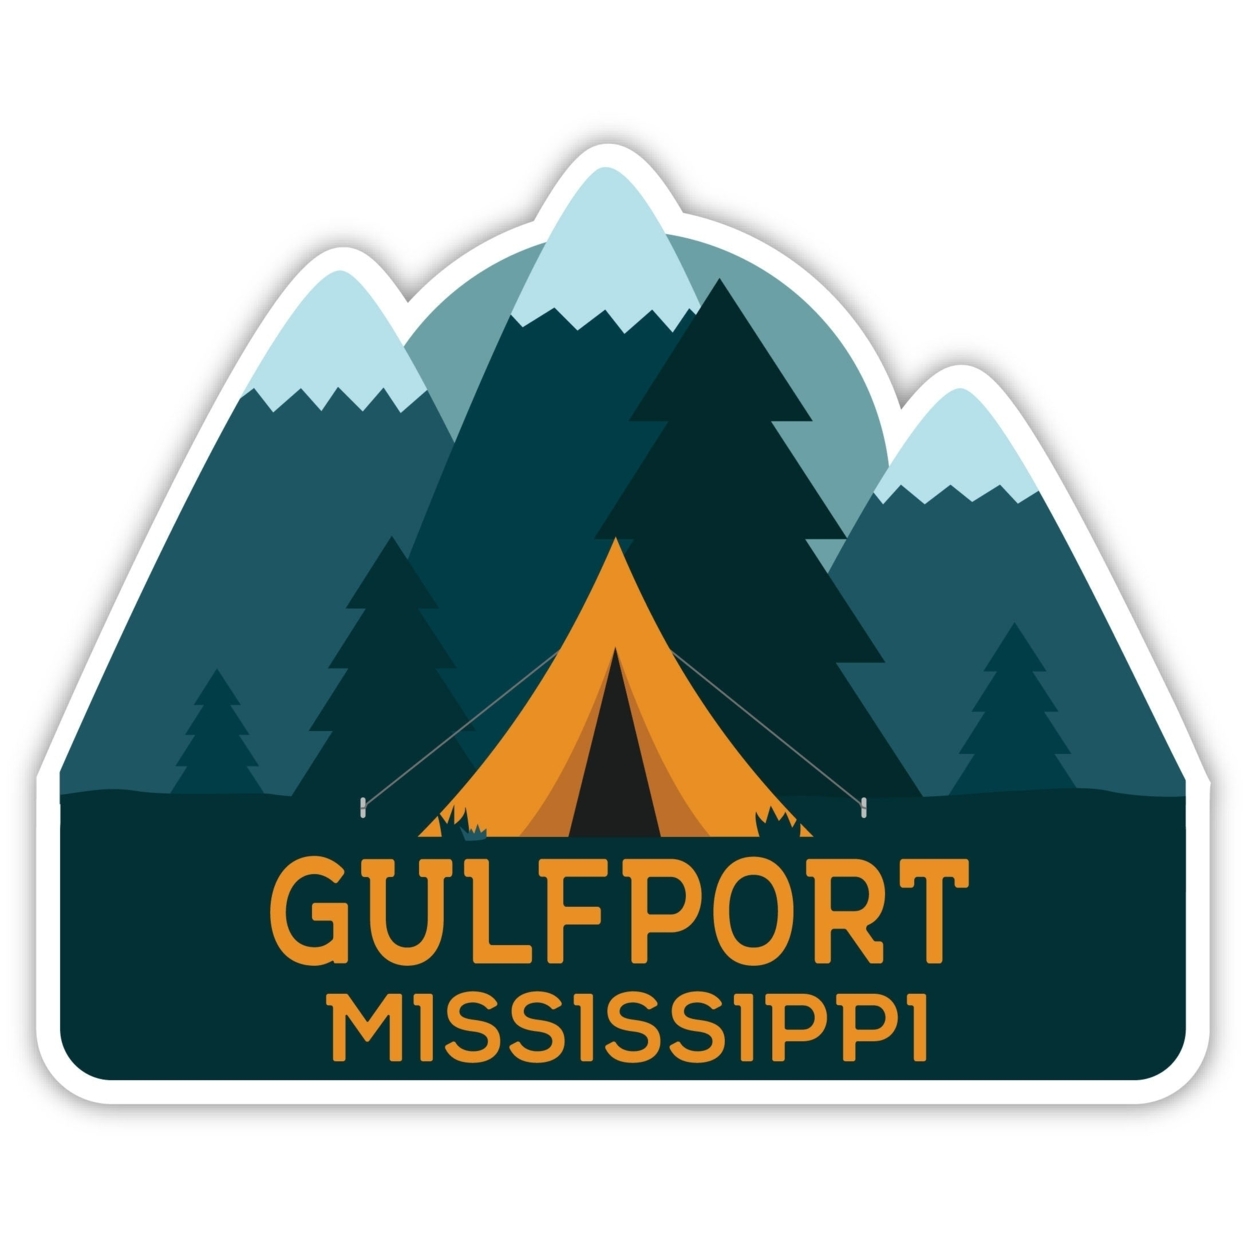 Gulfport Mississippi Souvenir Decorative Stickers (Choose Theme And Size) - 4-Pack, 2-Inch, Adventures Awaits